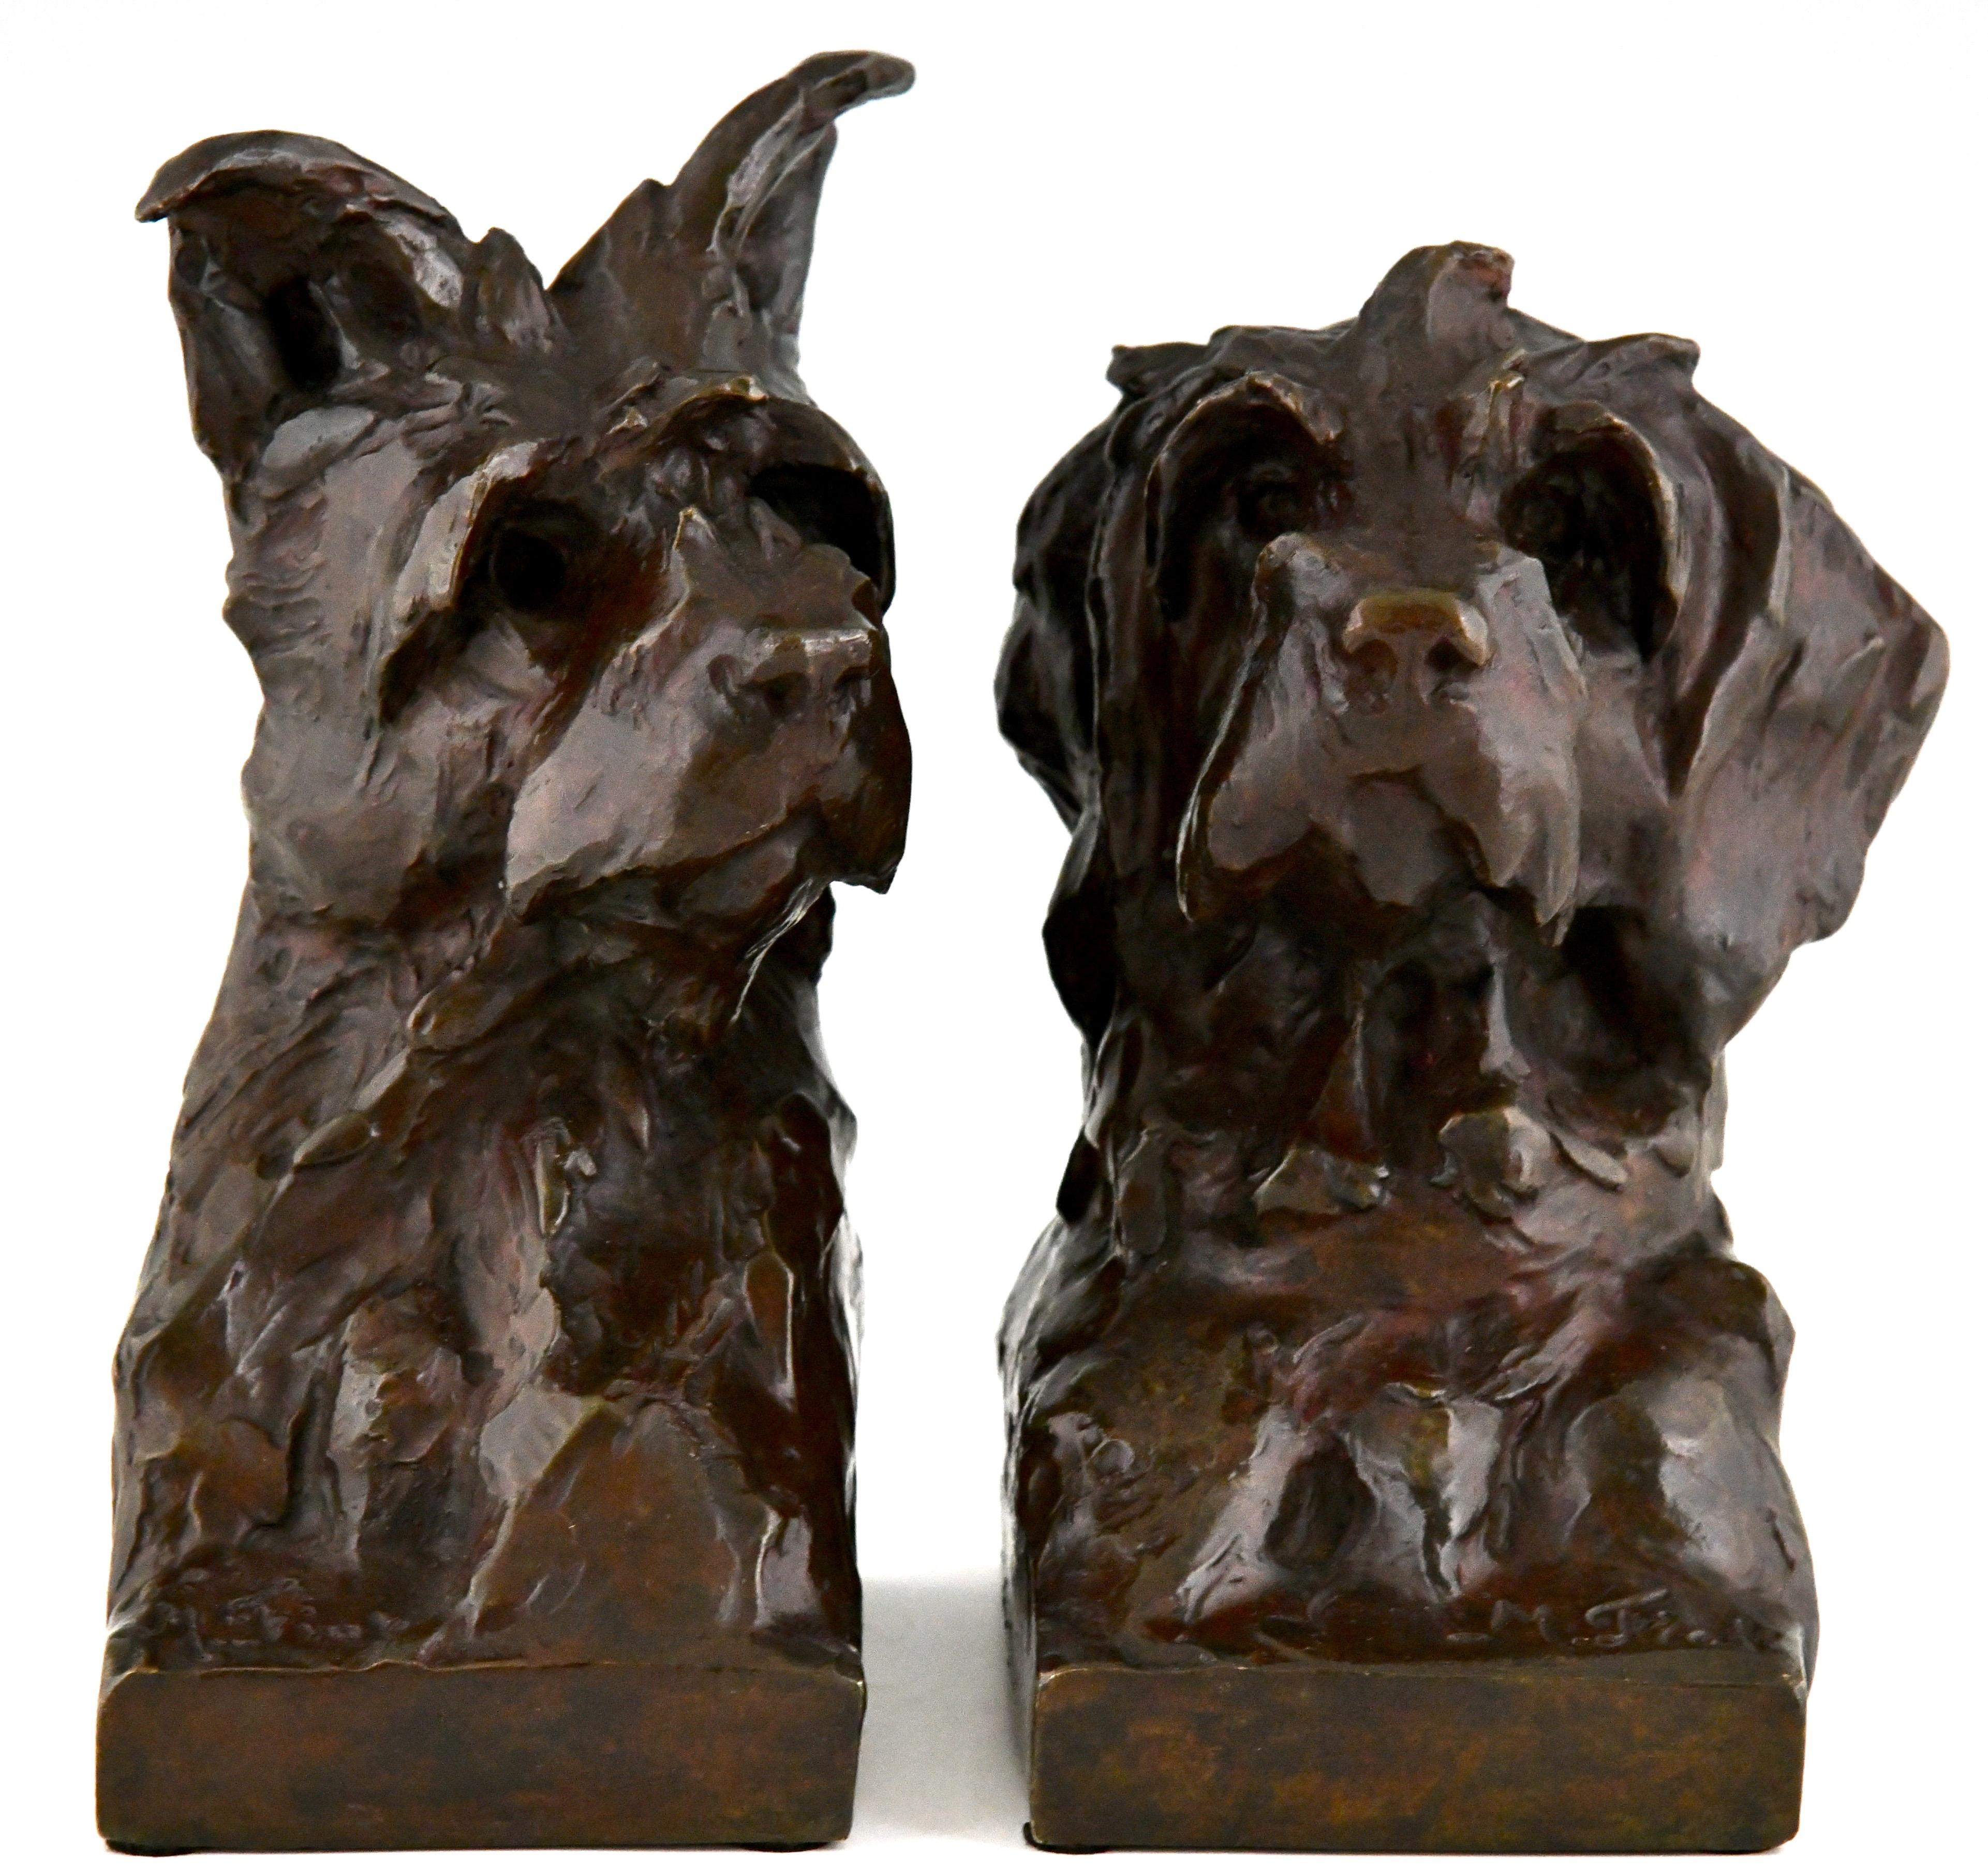 bronze dog bookends